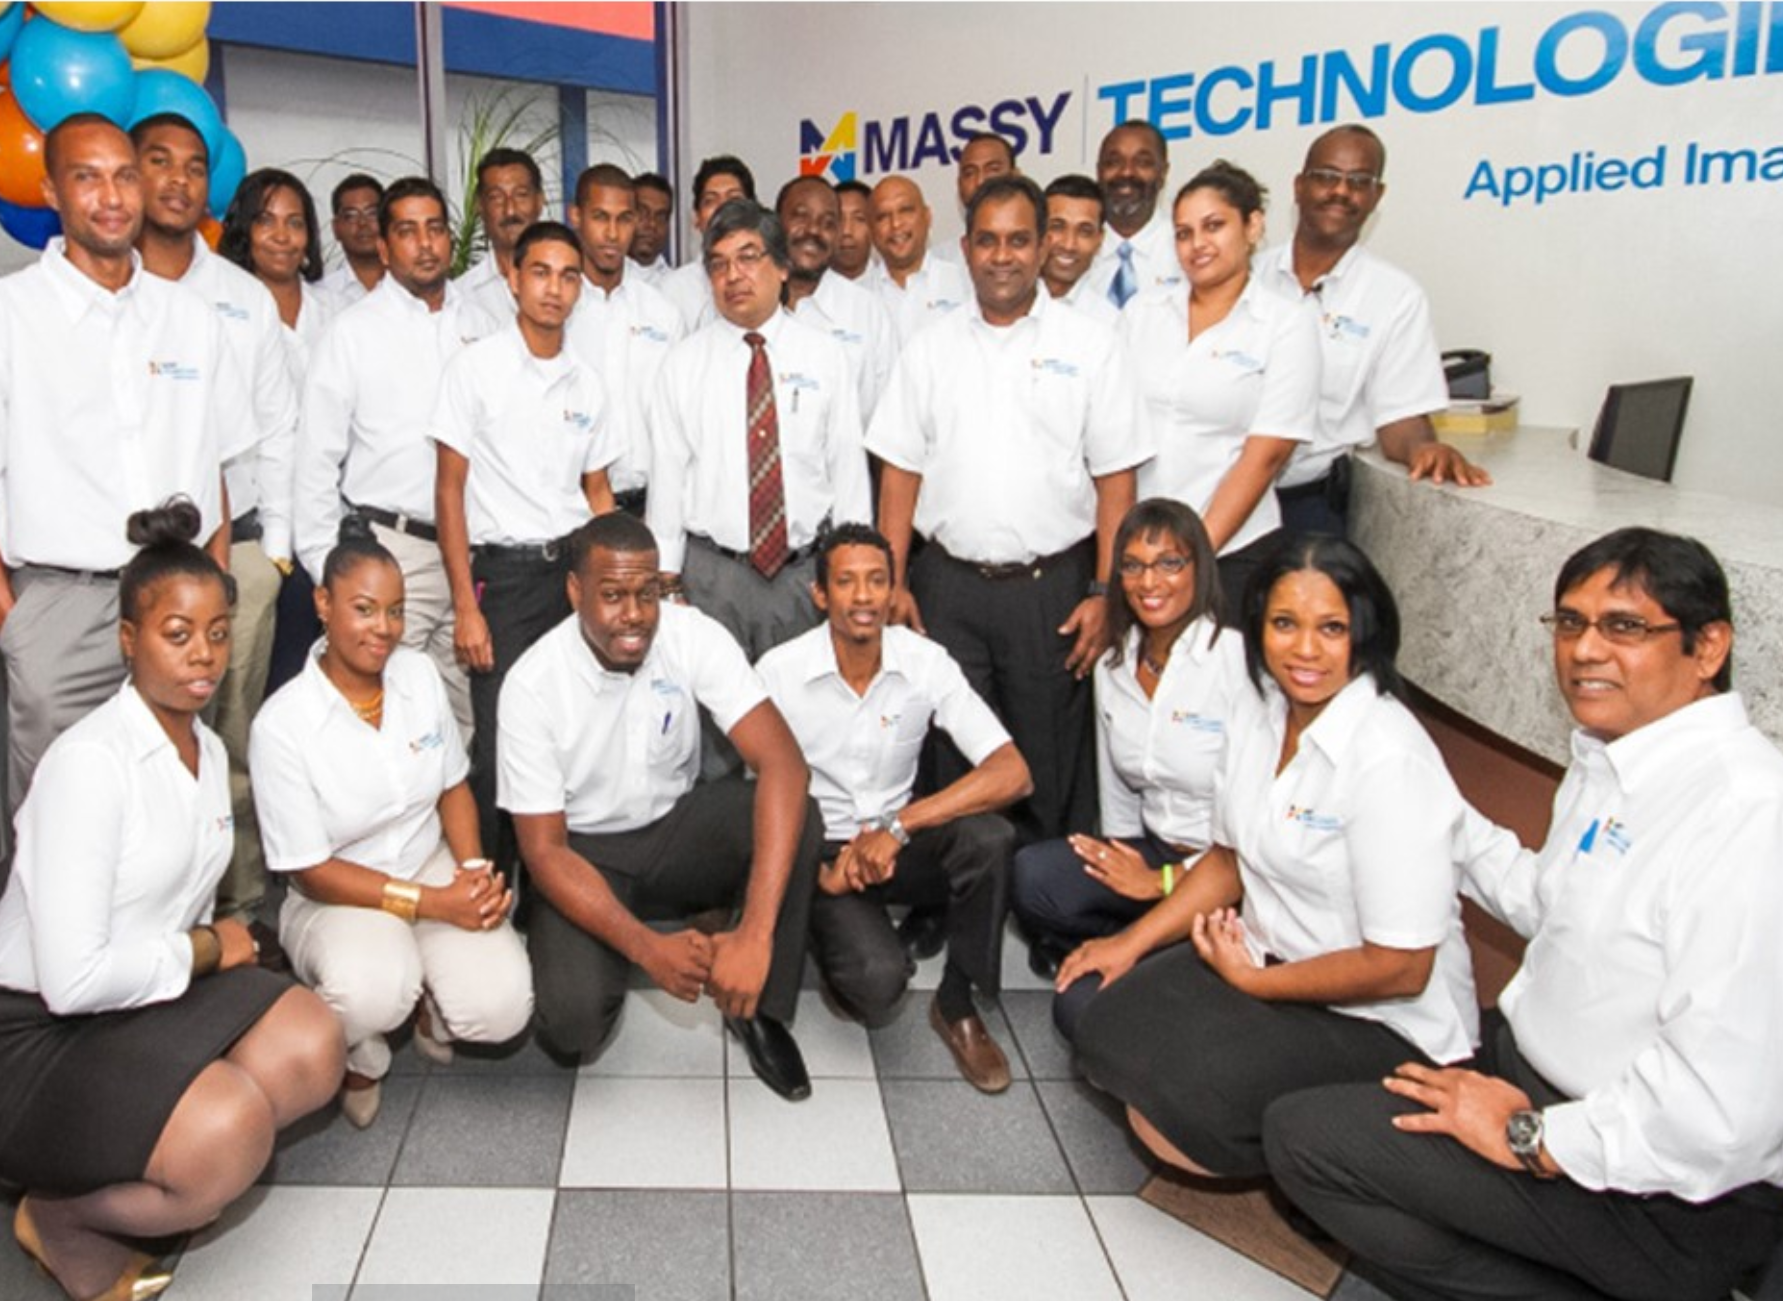 A group photo of Massy Technology employees, back row standing, front row kneeling.